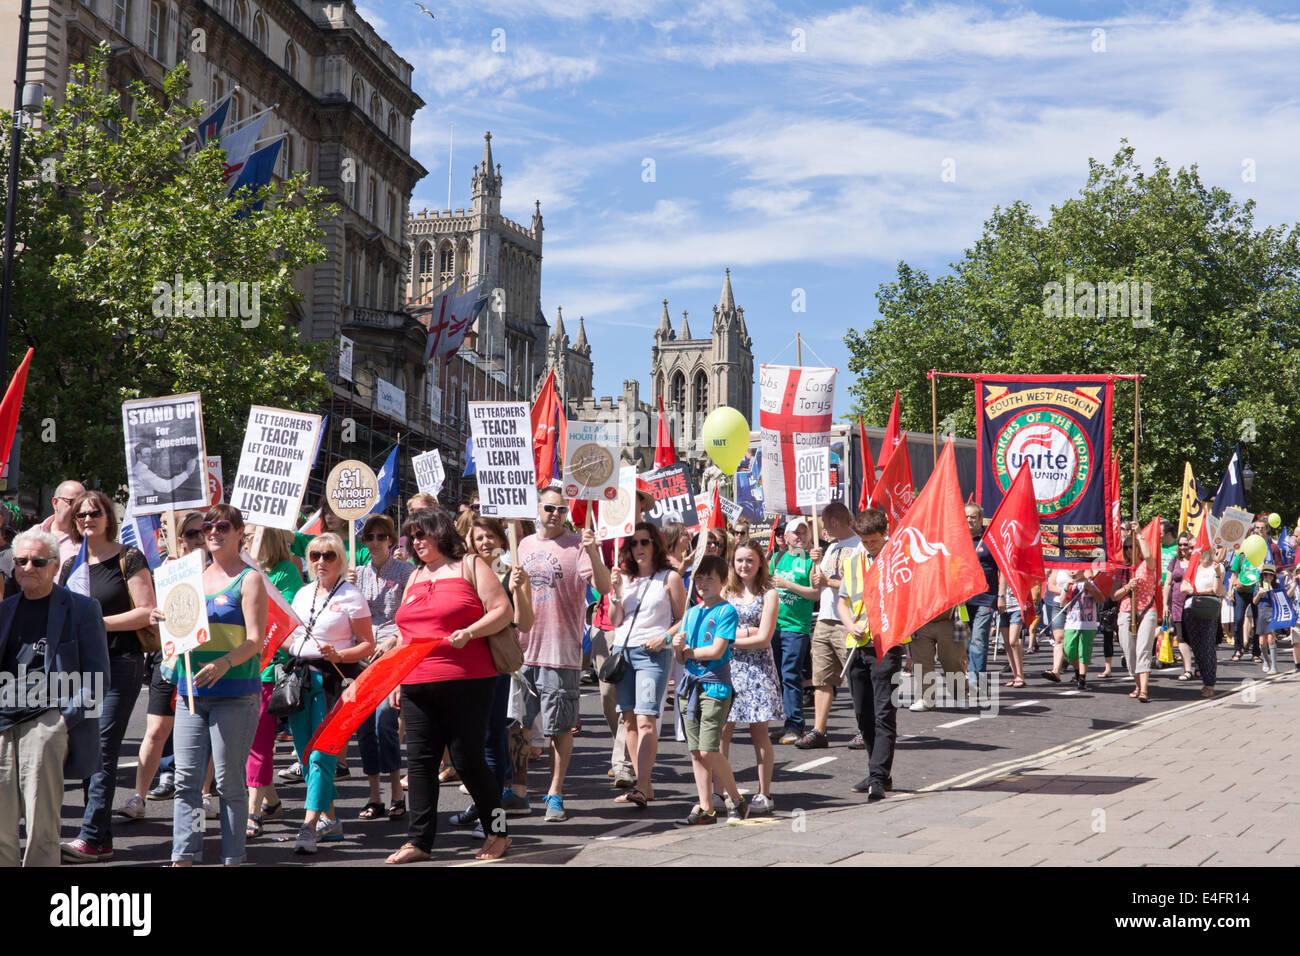 Bristol, UK. 10th July, 2014. Public sector workers have gone on strike today to protest at the British Governments freeze on pay. Members of the NUT, Unison, GMB, the Fire Brigade Union and some others met up on College Green before marching through the City. Credit:  Mr Standfast/Alamy Live News Stock Photo